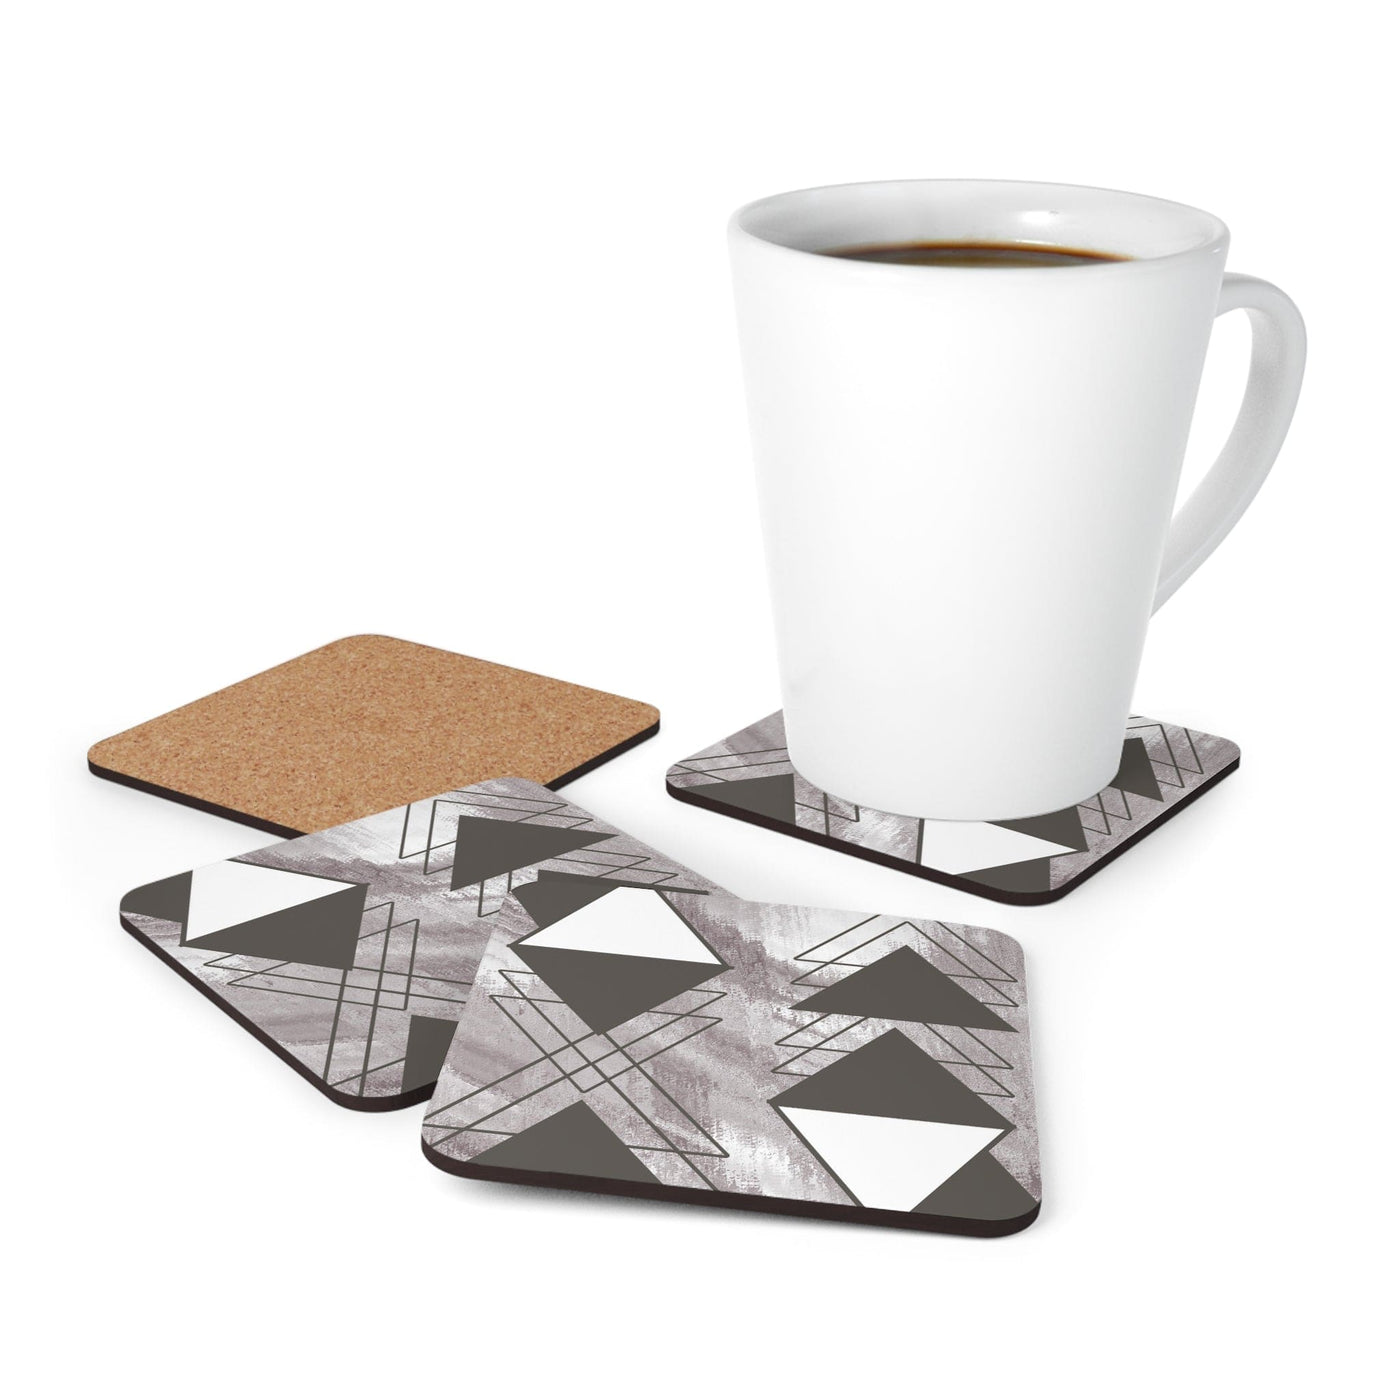 Coaster Set Of 4 For Drinks Ash Grey And White Triangular Colorblock